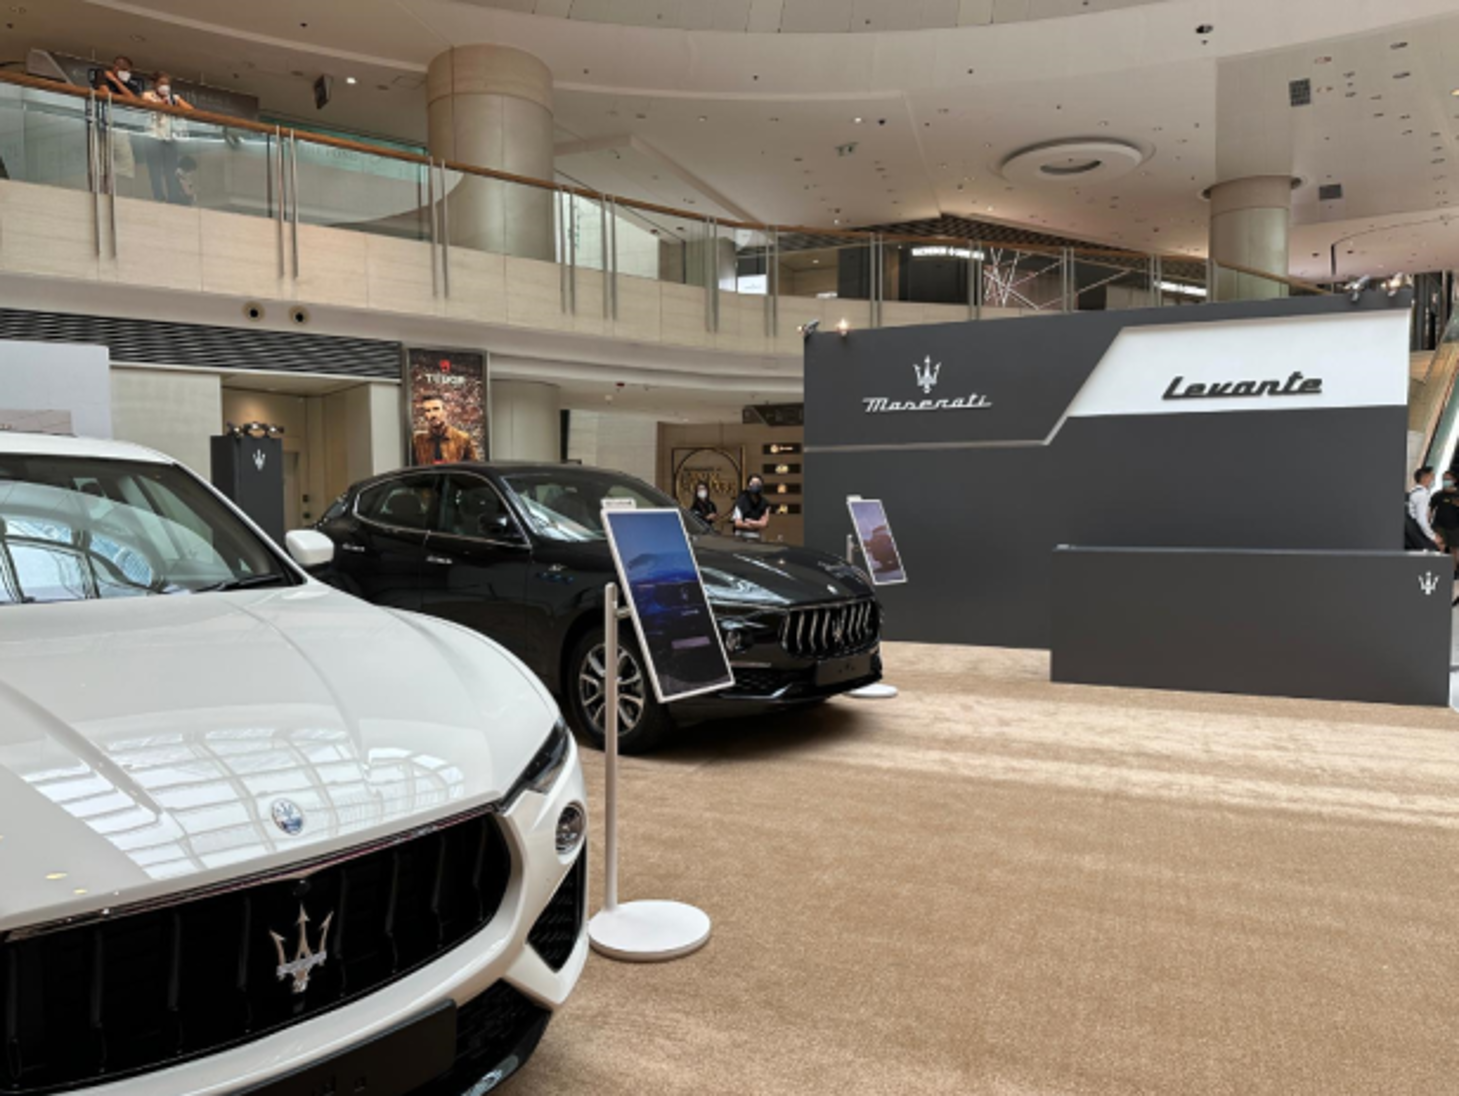 LG StanbyME installed next to the Maserati's luxurious automobiles at Maserati showroom in Hong Kong